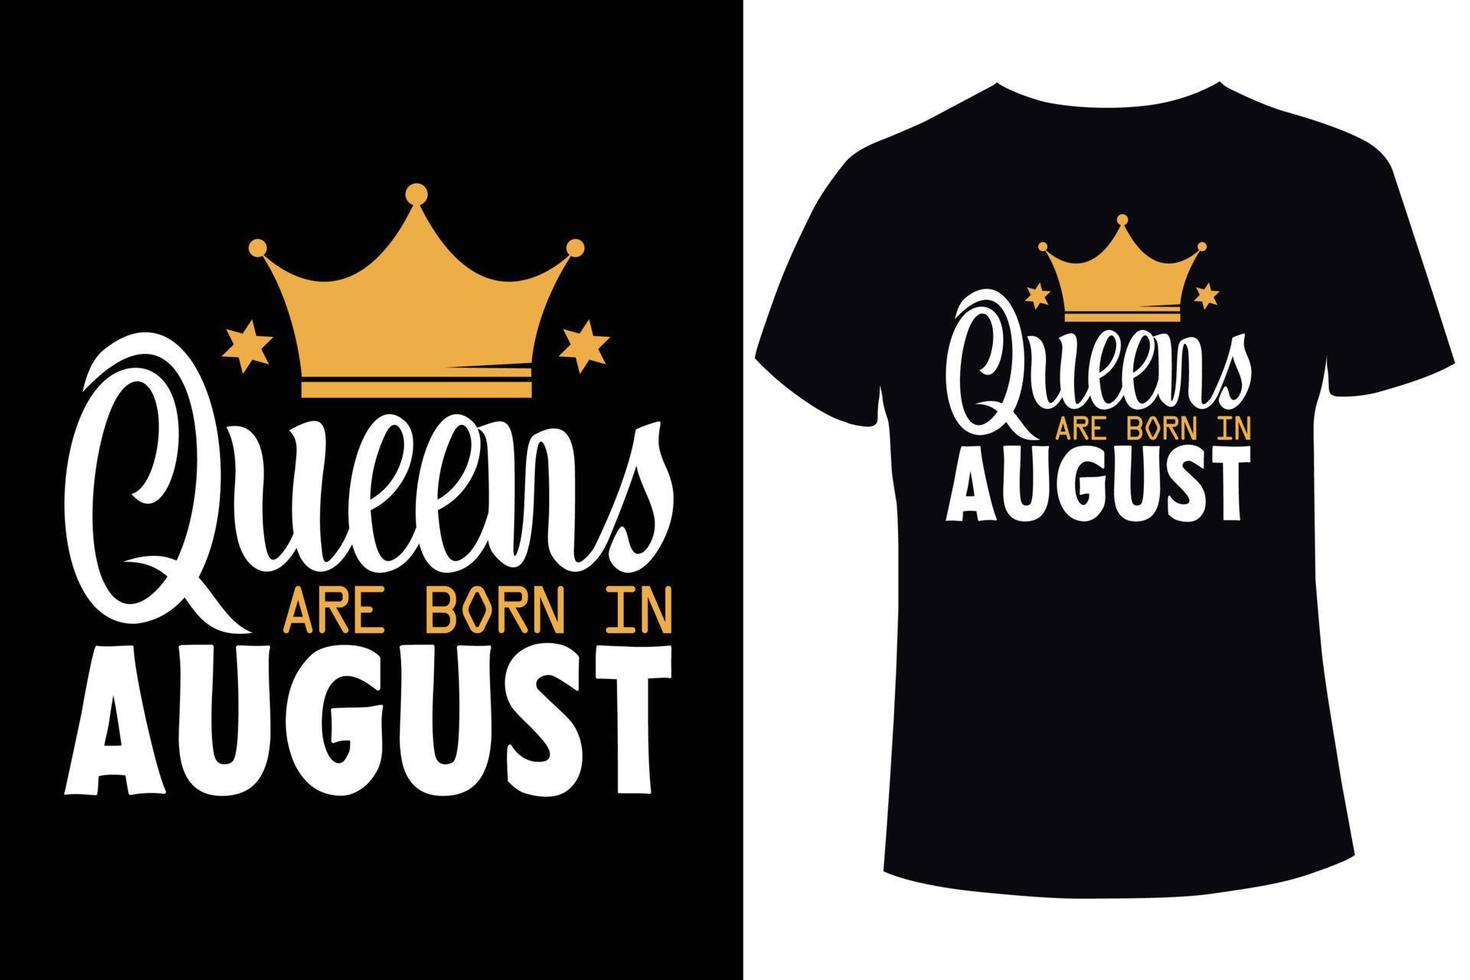 Queens are born in August t-shirt design template vector